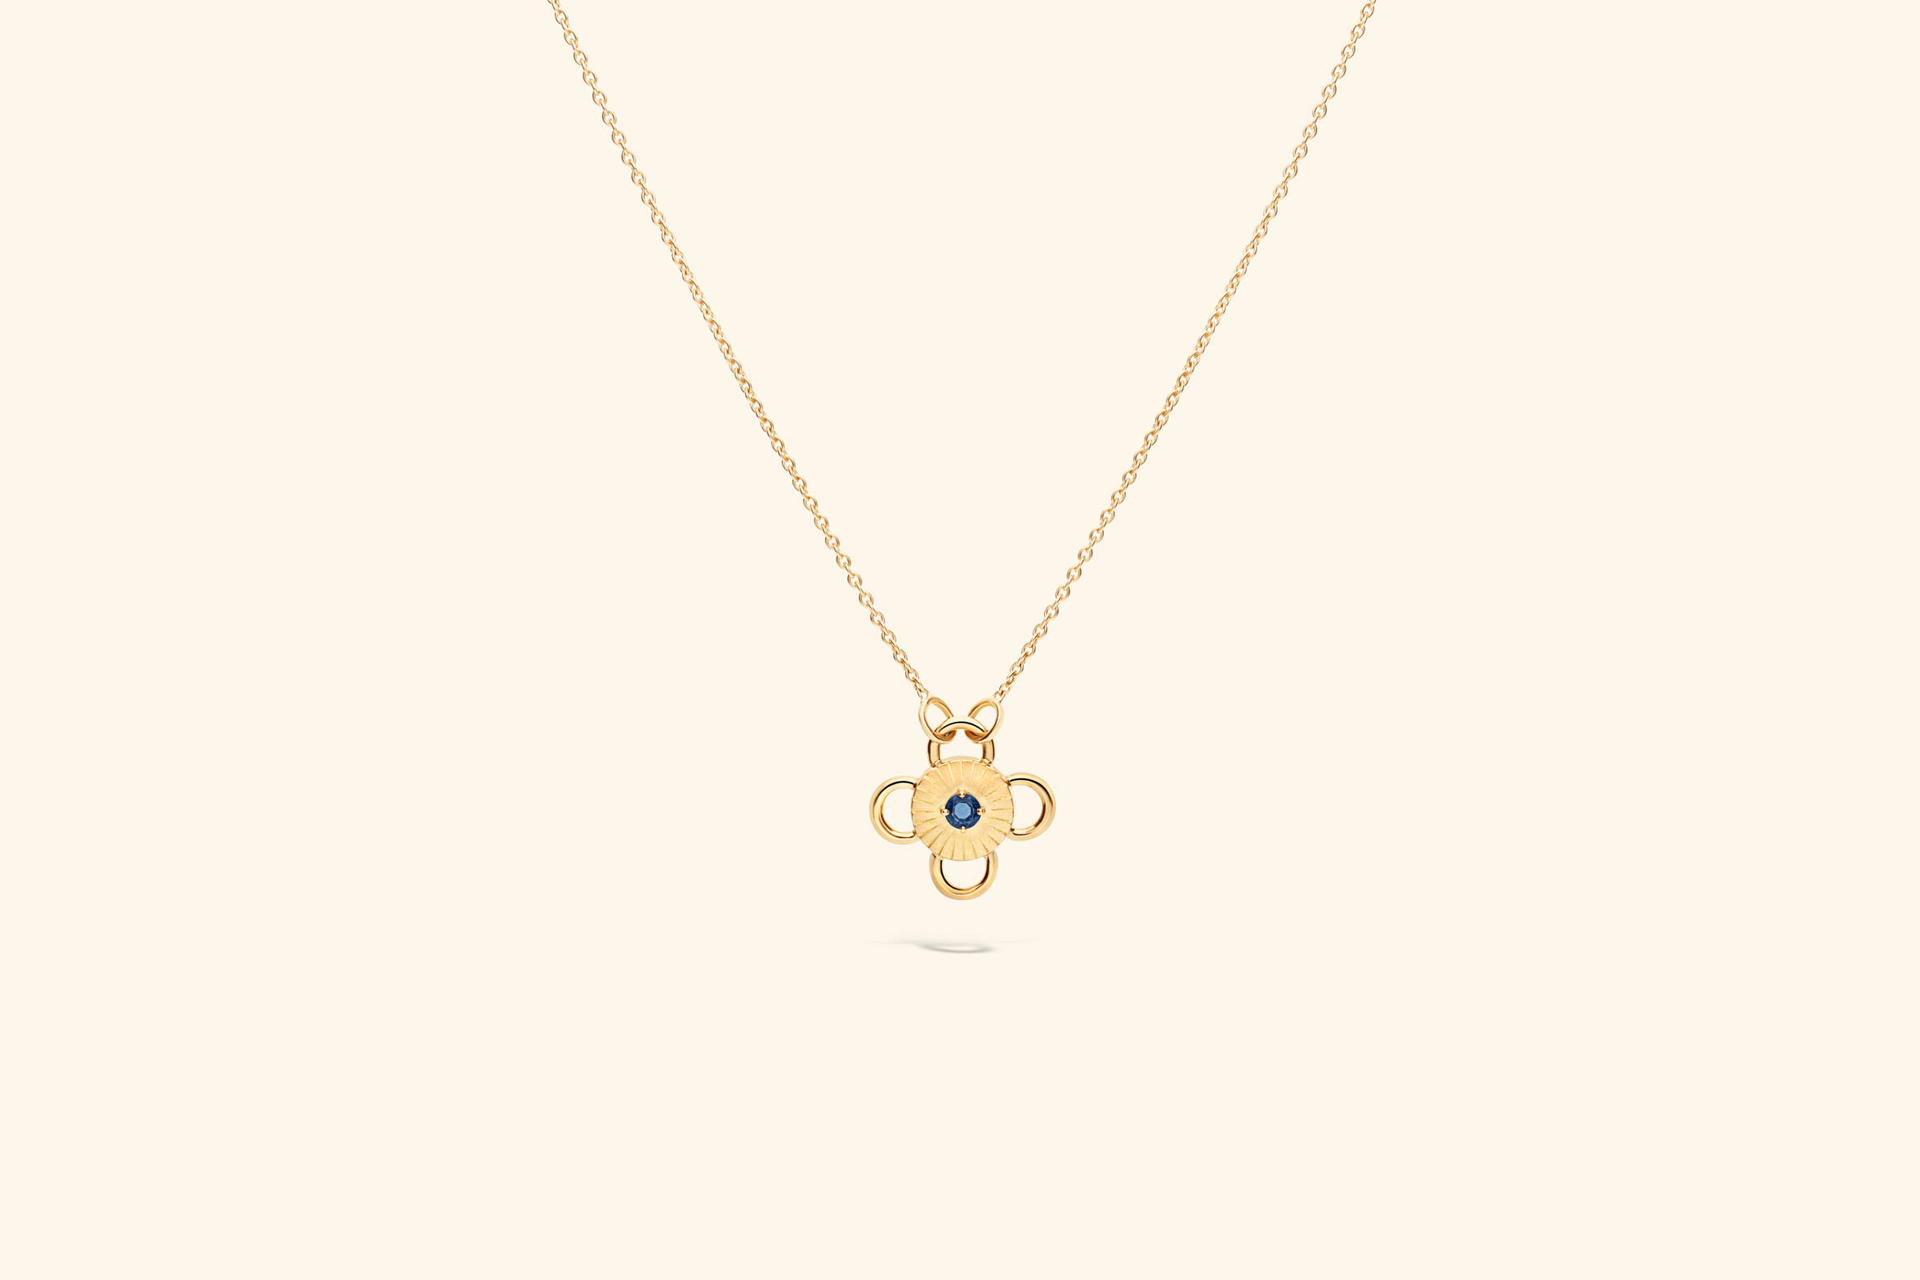 Baby Bolt Necklace jewelry in gold, set with a round sapphire